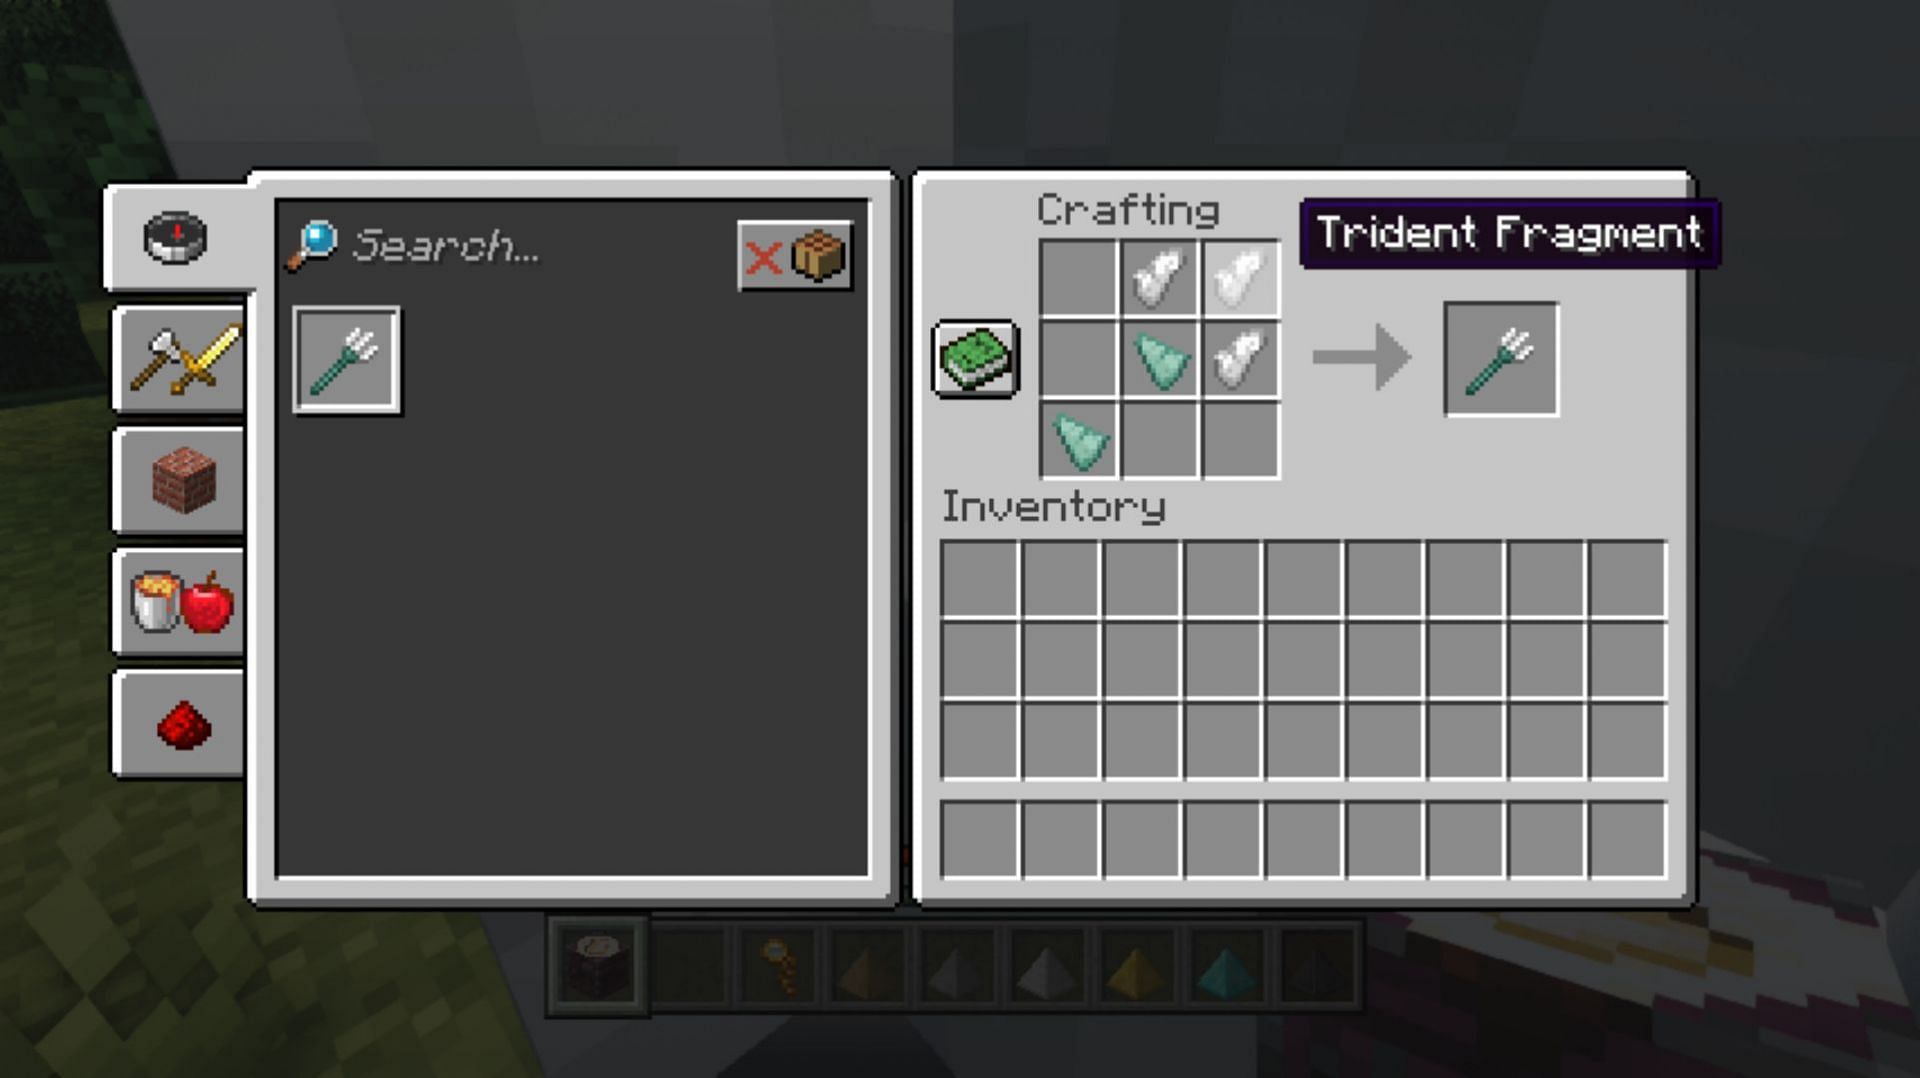 Tridents can be crafted in this Minecraft mod (Image via CurseForge)